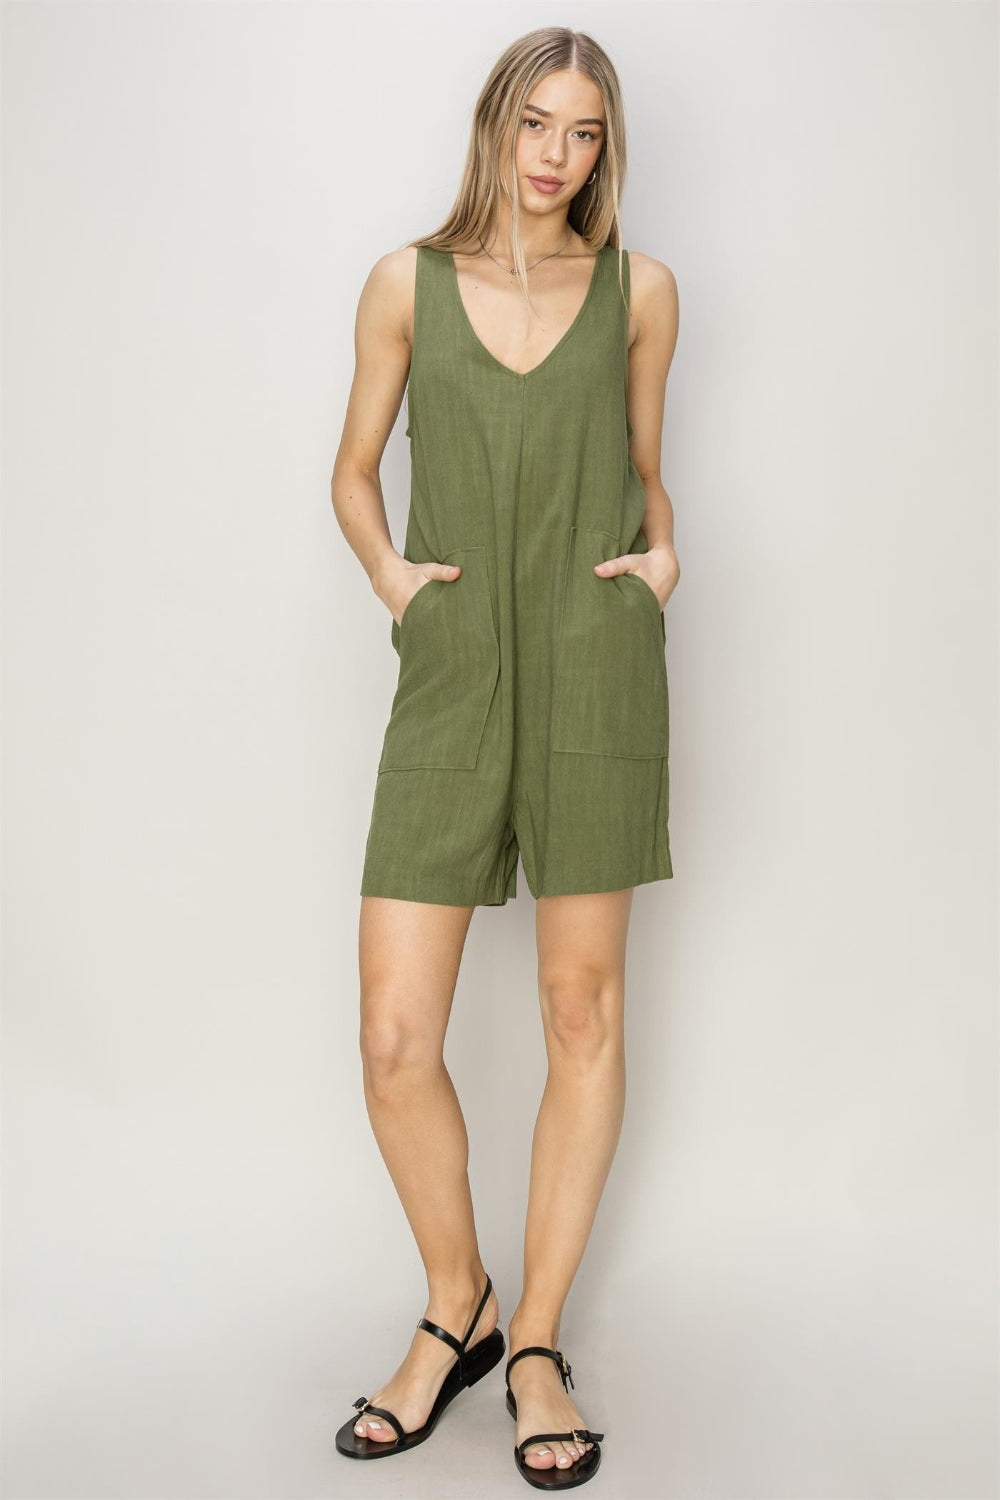 V-Neck Sleeveless Romper with Pockets in Moss